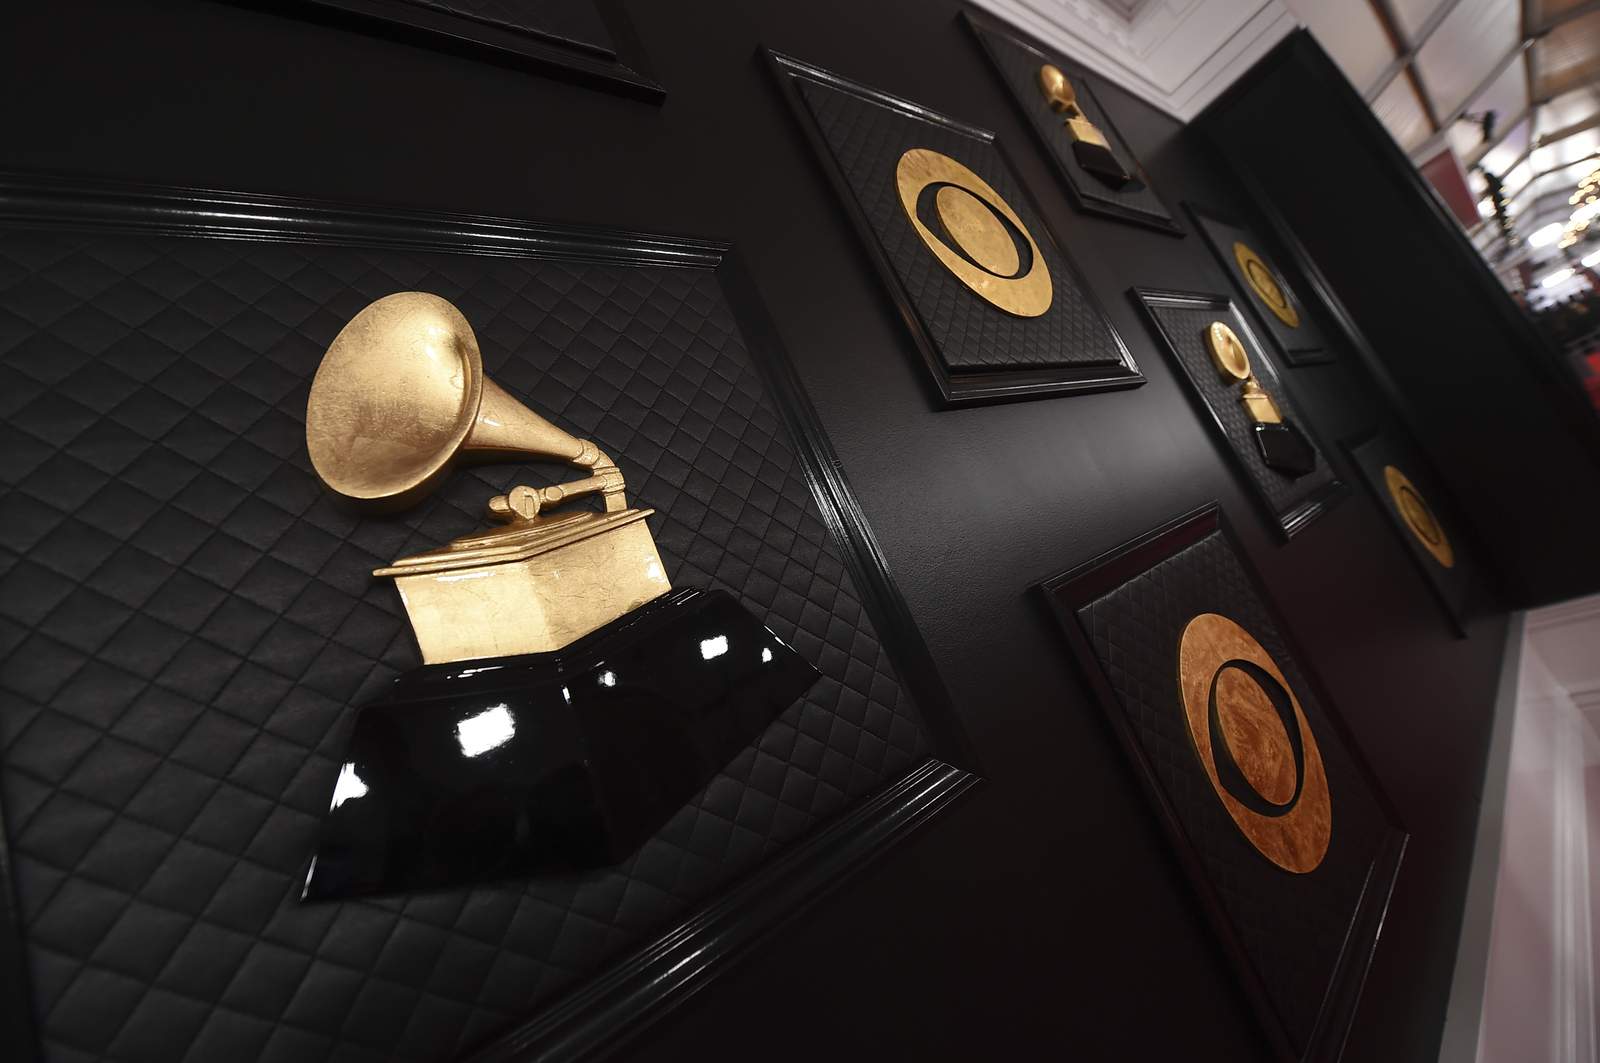 Seeking inclusion, Grammys change name of a music category